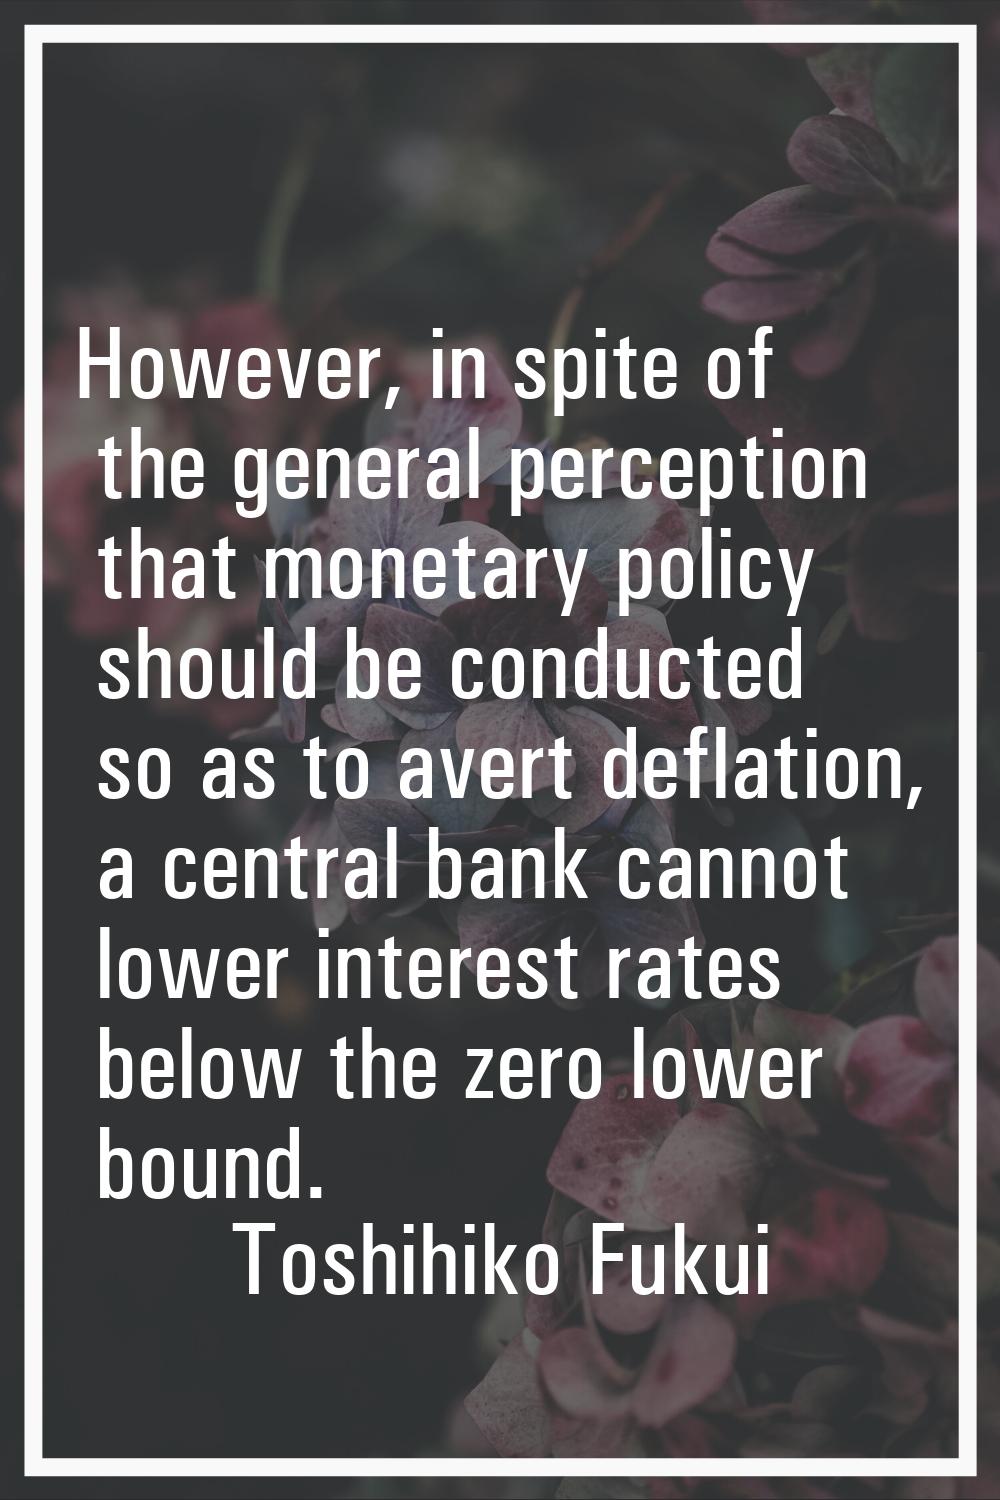 However, in spite of the general perception that monetary policy should be conducted so as to avert